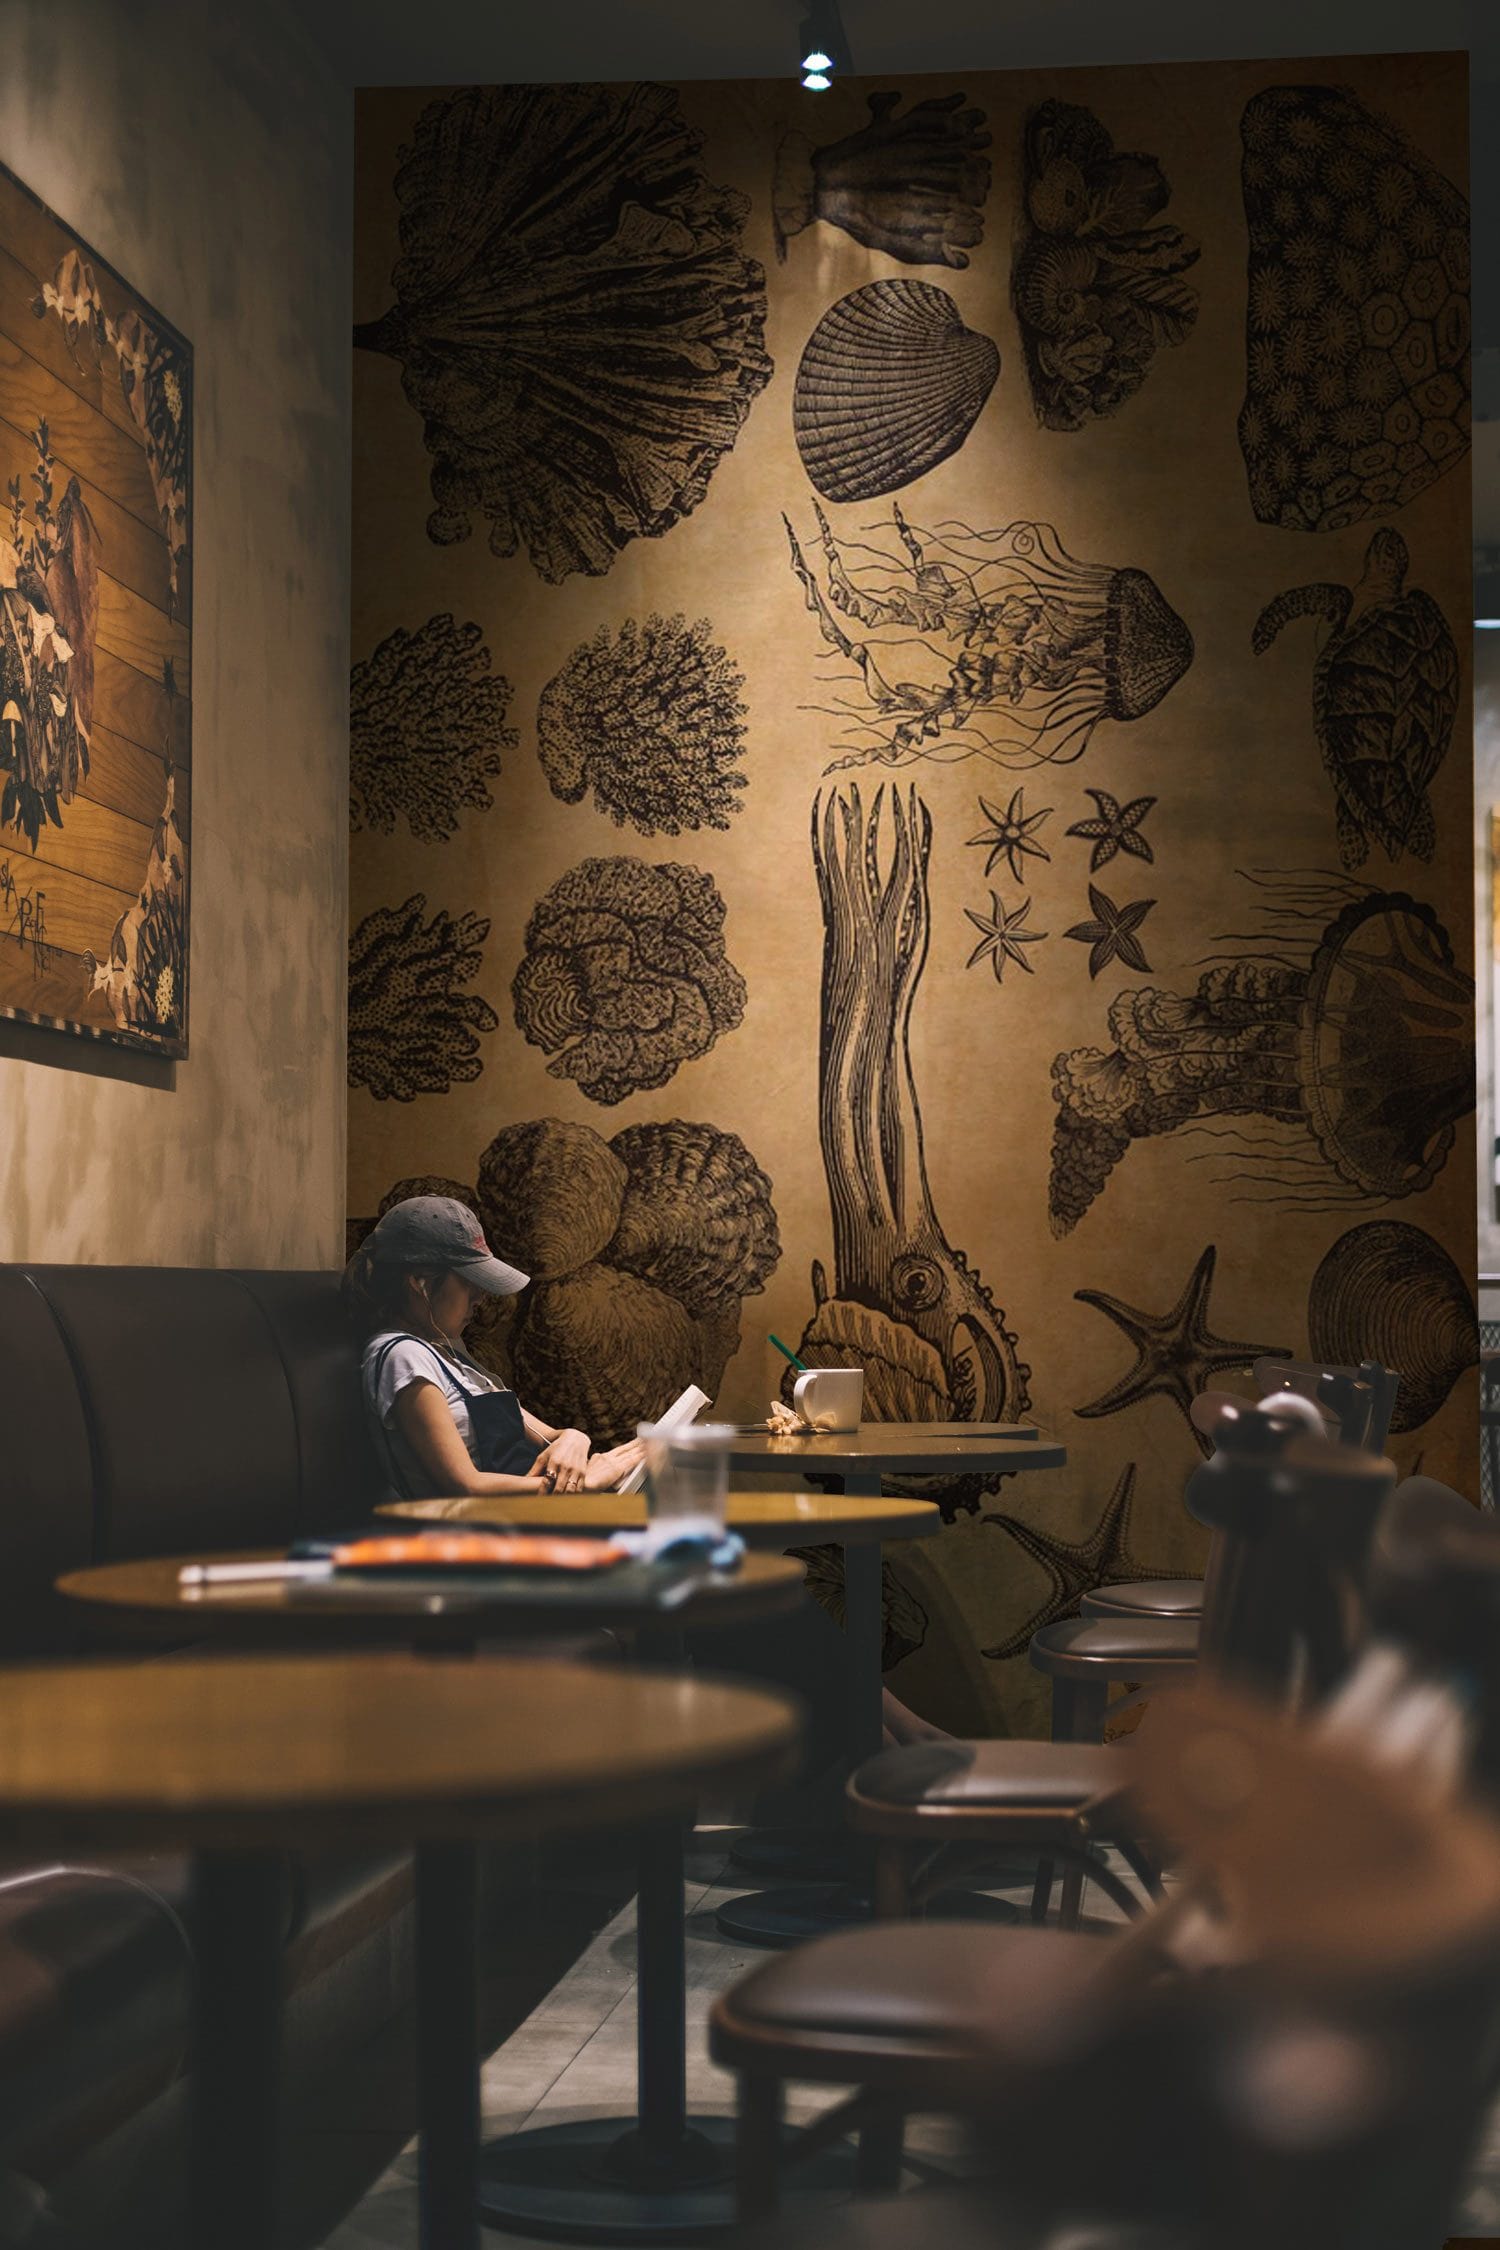 Wallpaper mural featuring vintage marine life for use in decorating restaurants.